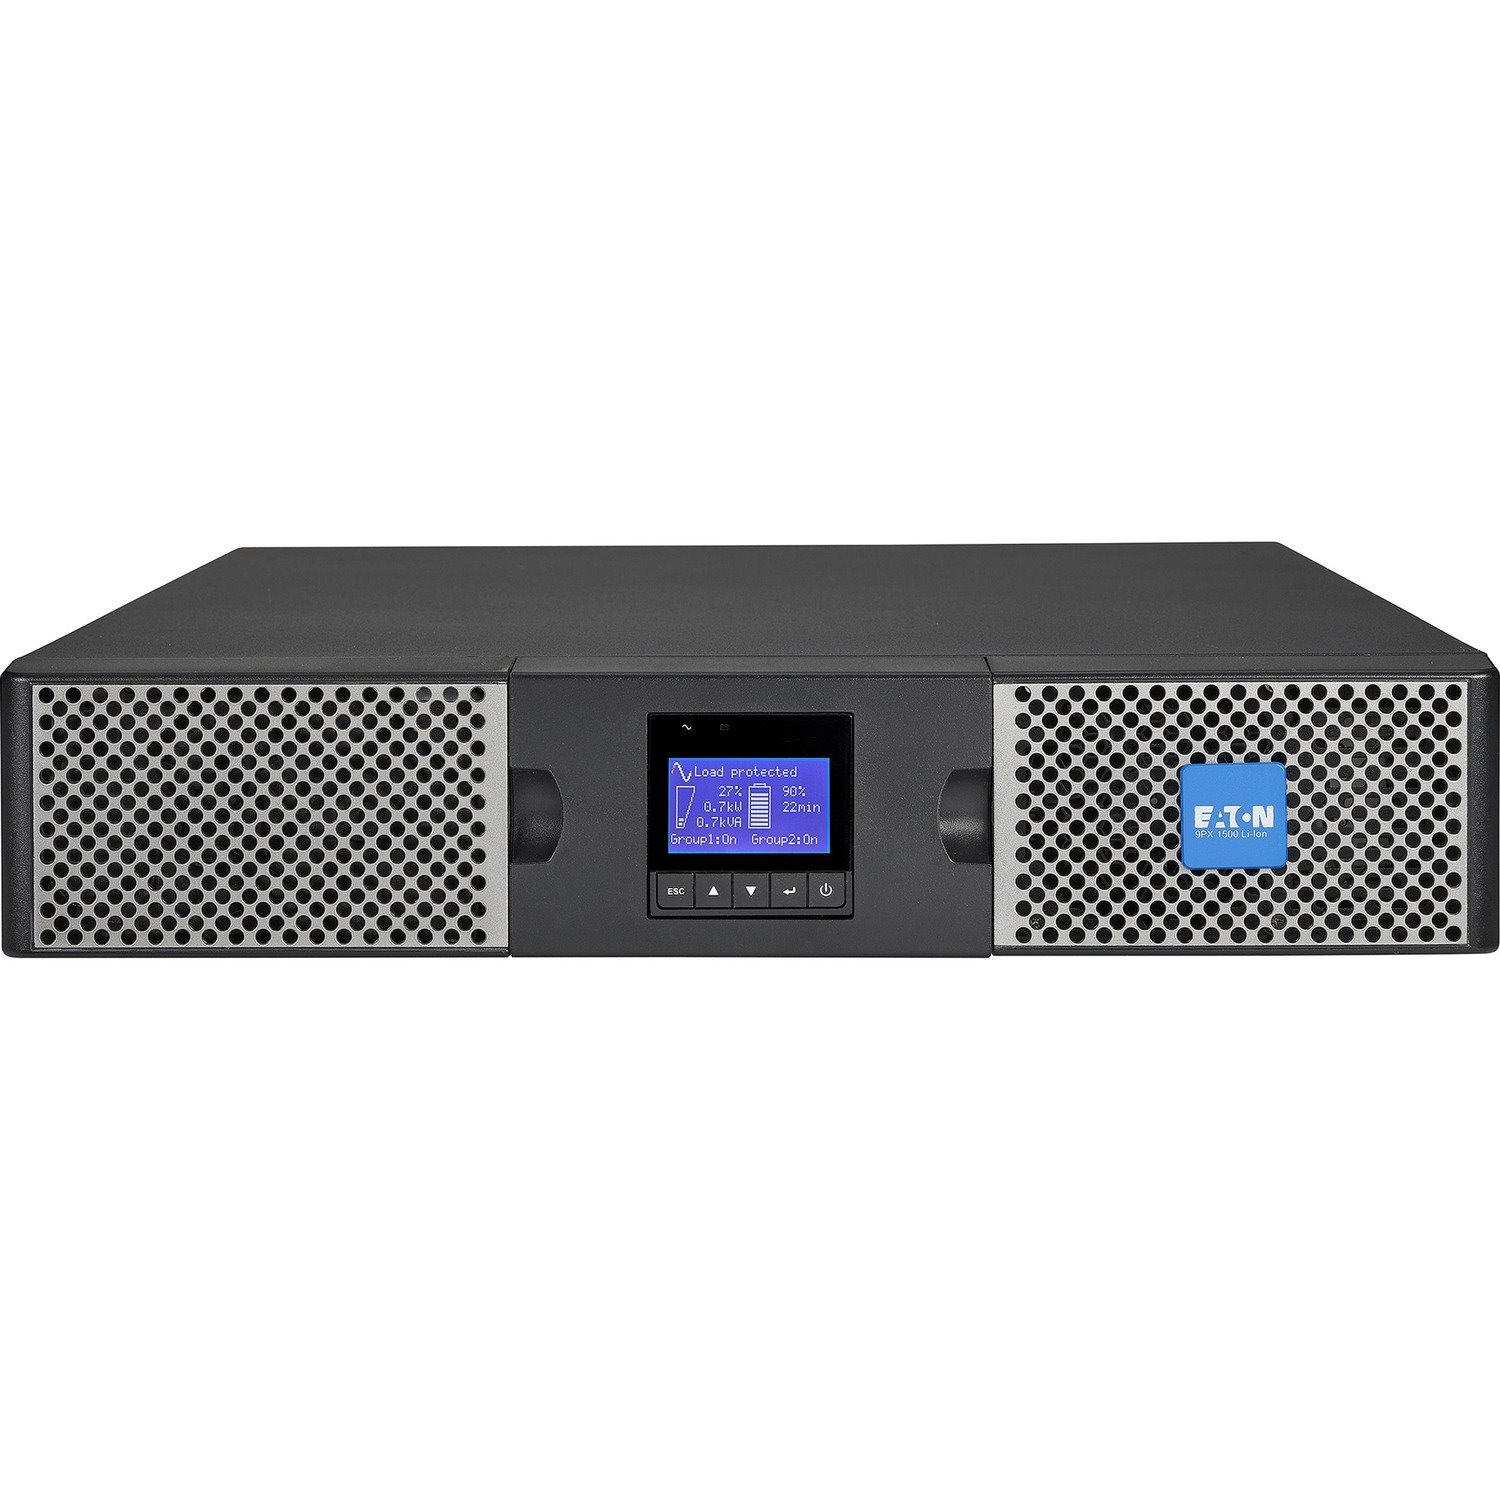 Eaton 9PX 1500VA 1350W 208V Online Double-Conversion UPS - C14 input, 8 C13, Outlets, Lithium-ion Battery, Cybersecure Network Card Option, 2U Rack/Tower - Battery Backup